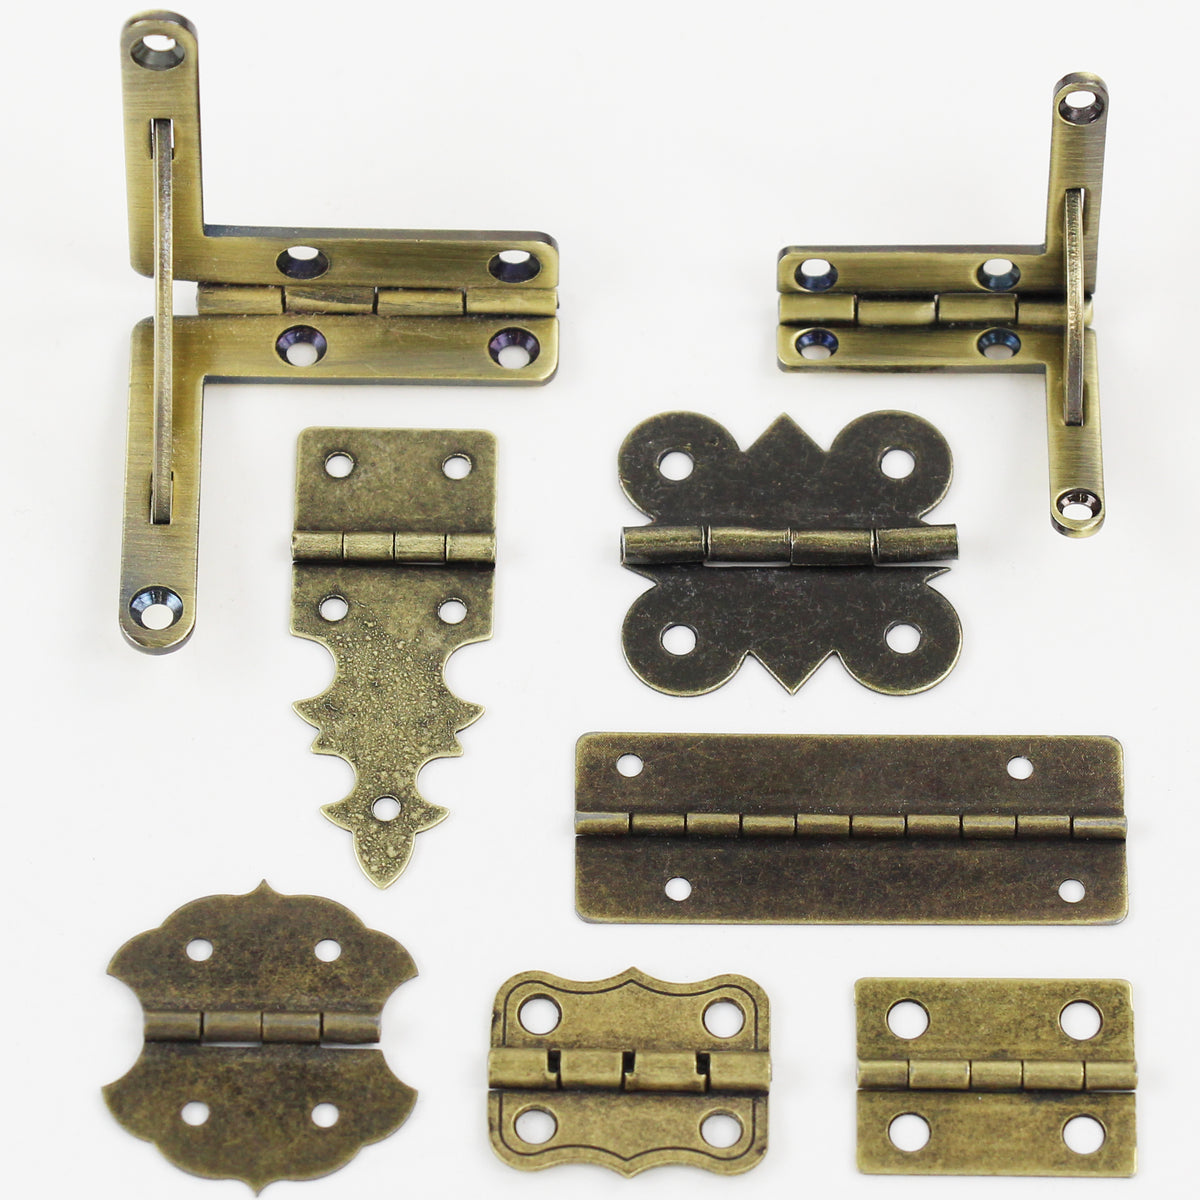 Brass Hinges – Small Box Hardware